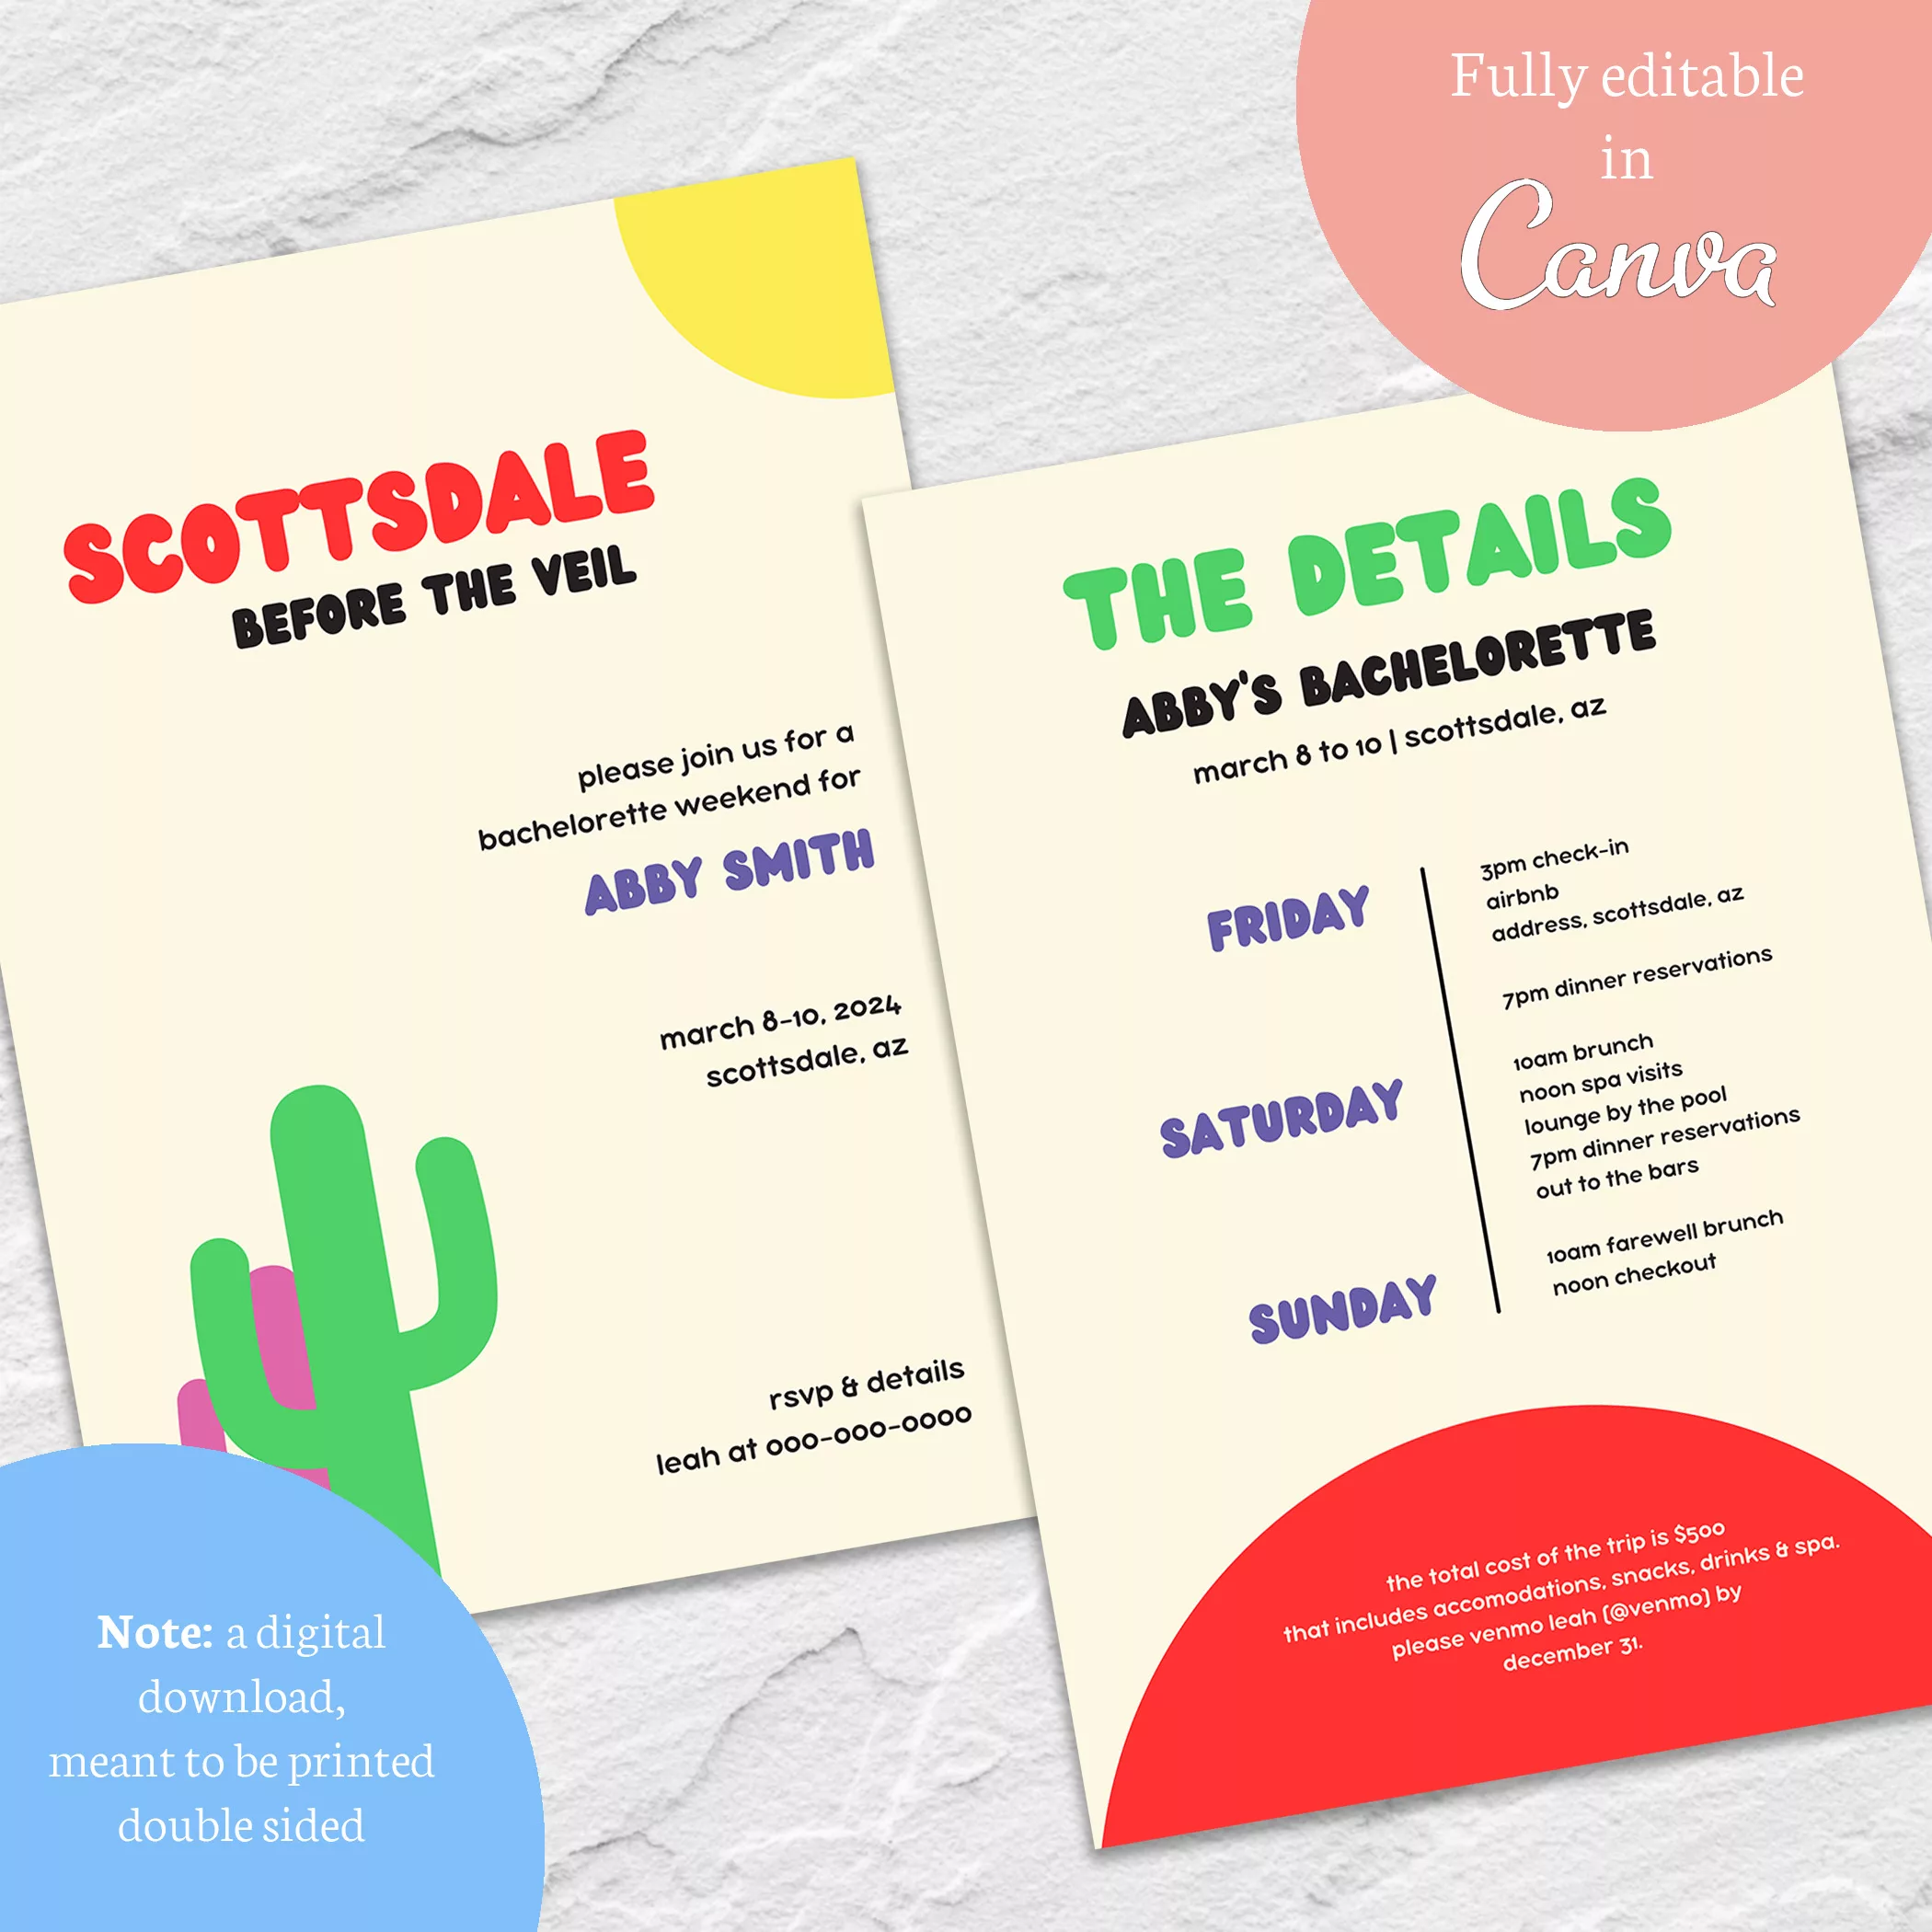 Scottsdale Before The Veil Bachelorette Itinerary 2